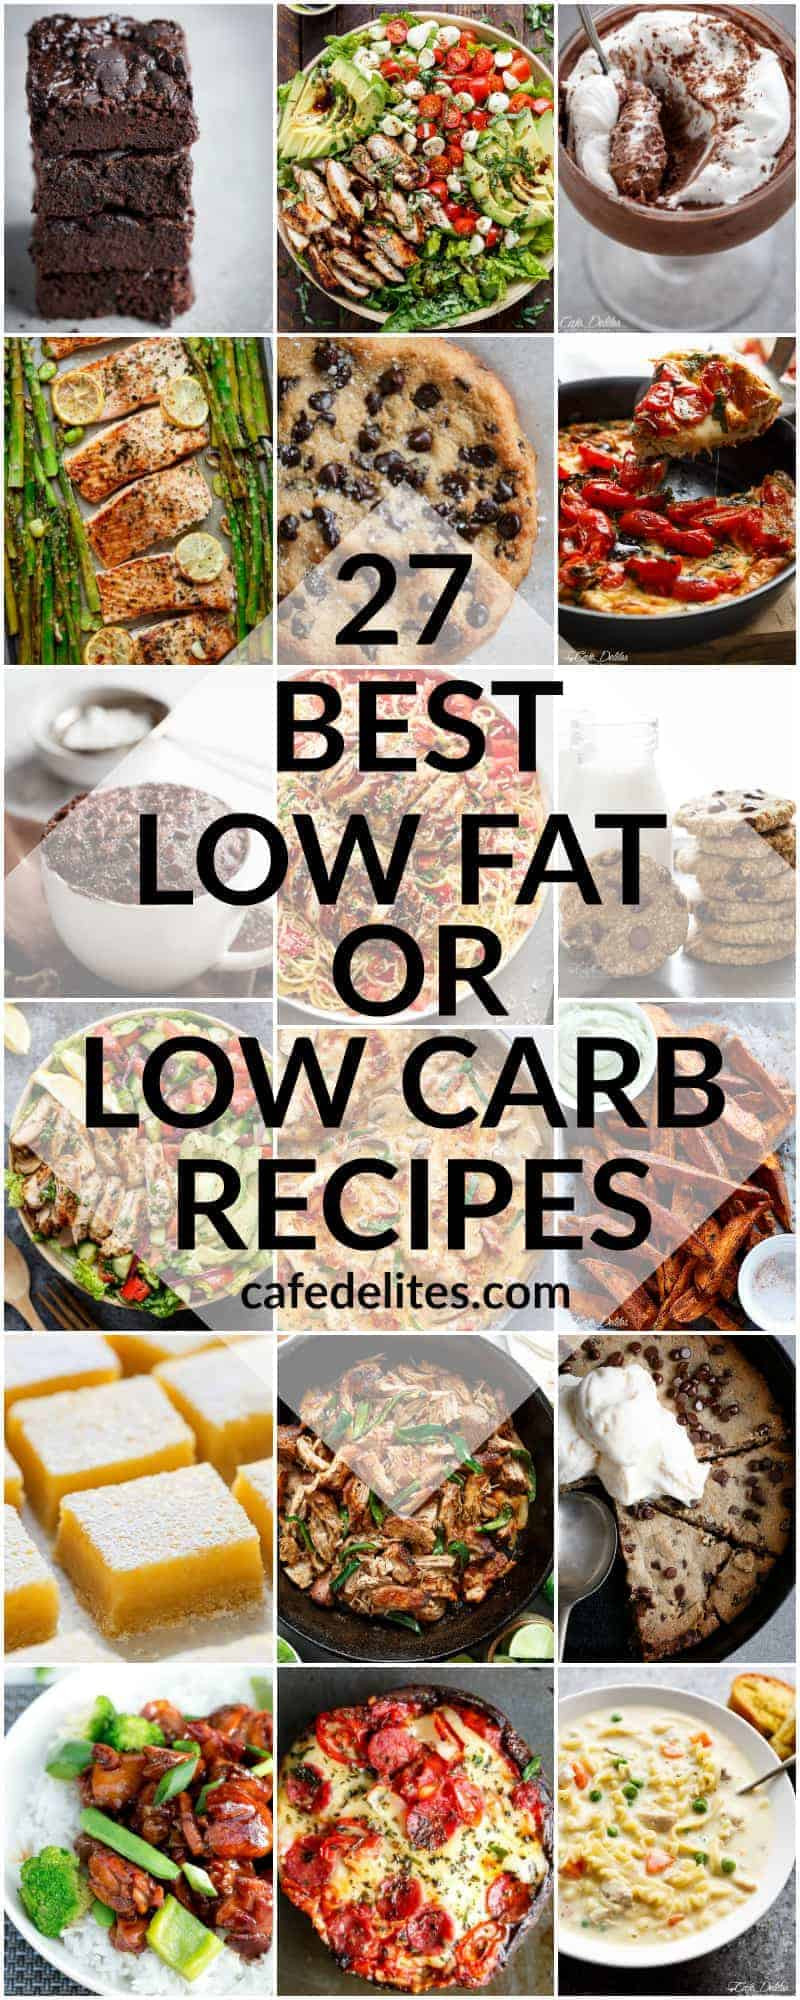 Best Low Fat Recipes
 27 BEST LOW FAT & LOW CARB RECIPES FOR 2017 Cafe Delites